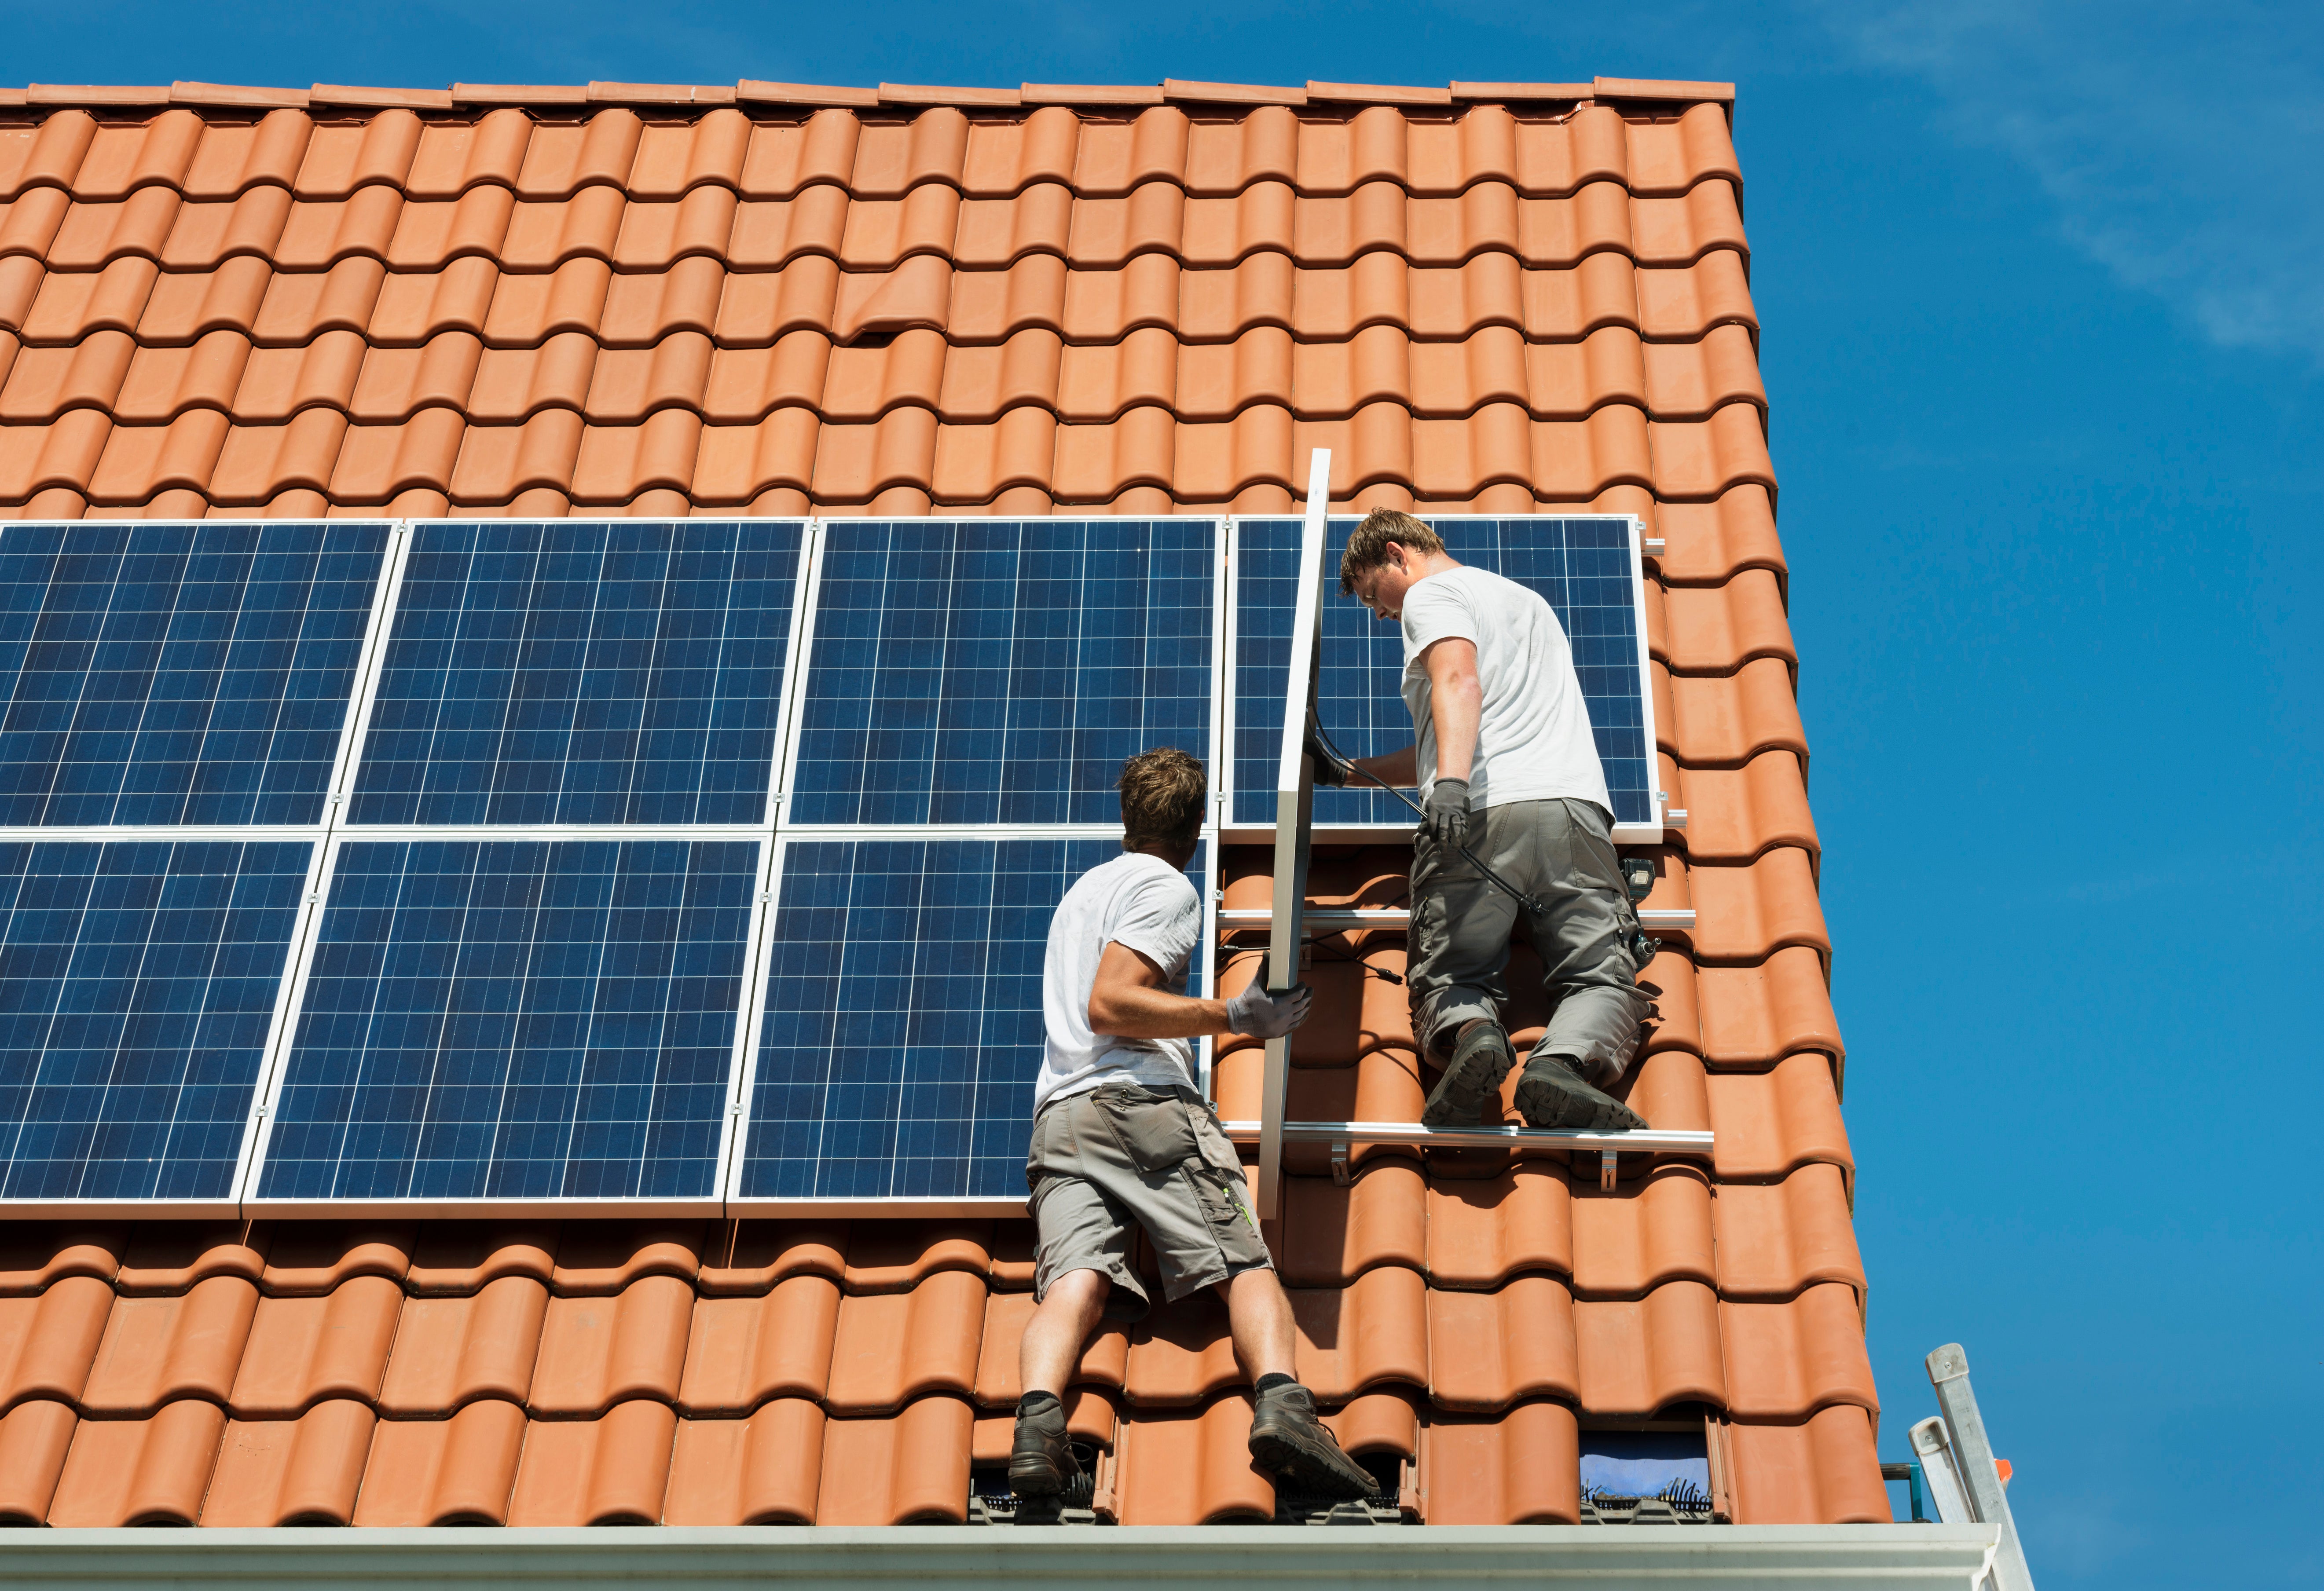 Where Do I Sign? Understanding Your Rooftop Solar Energy Contract